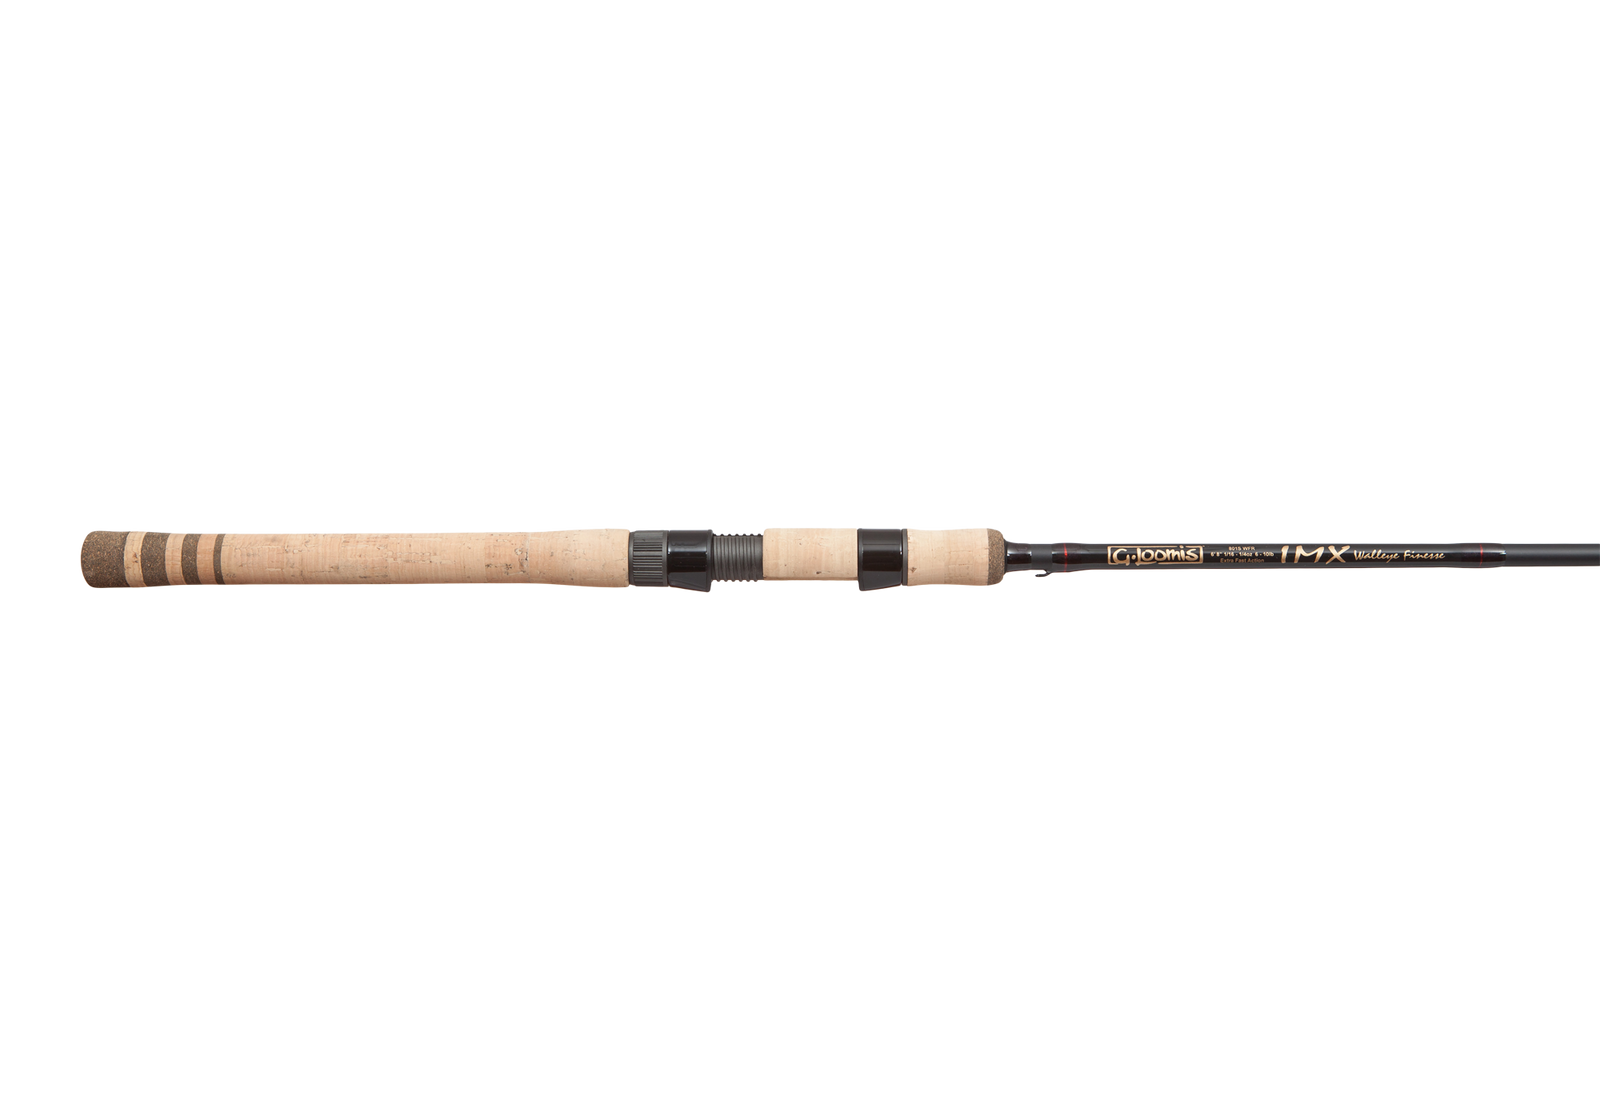 G Loomis IMX WALLEYE PITCHING JIG RODS - SPINNING detail image 1